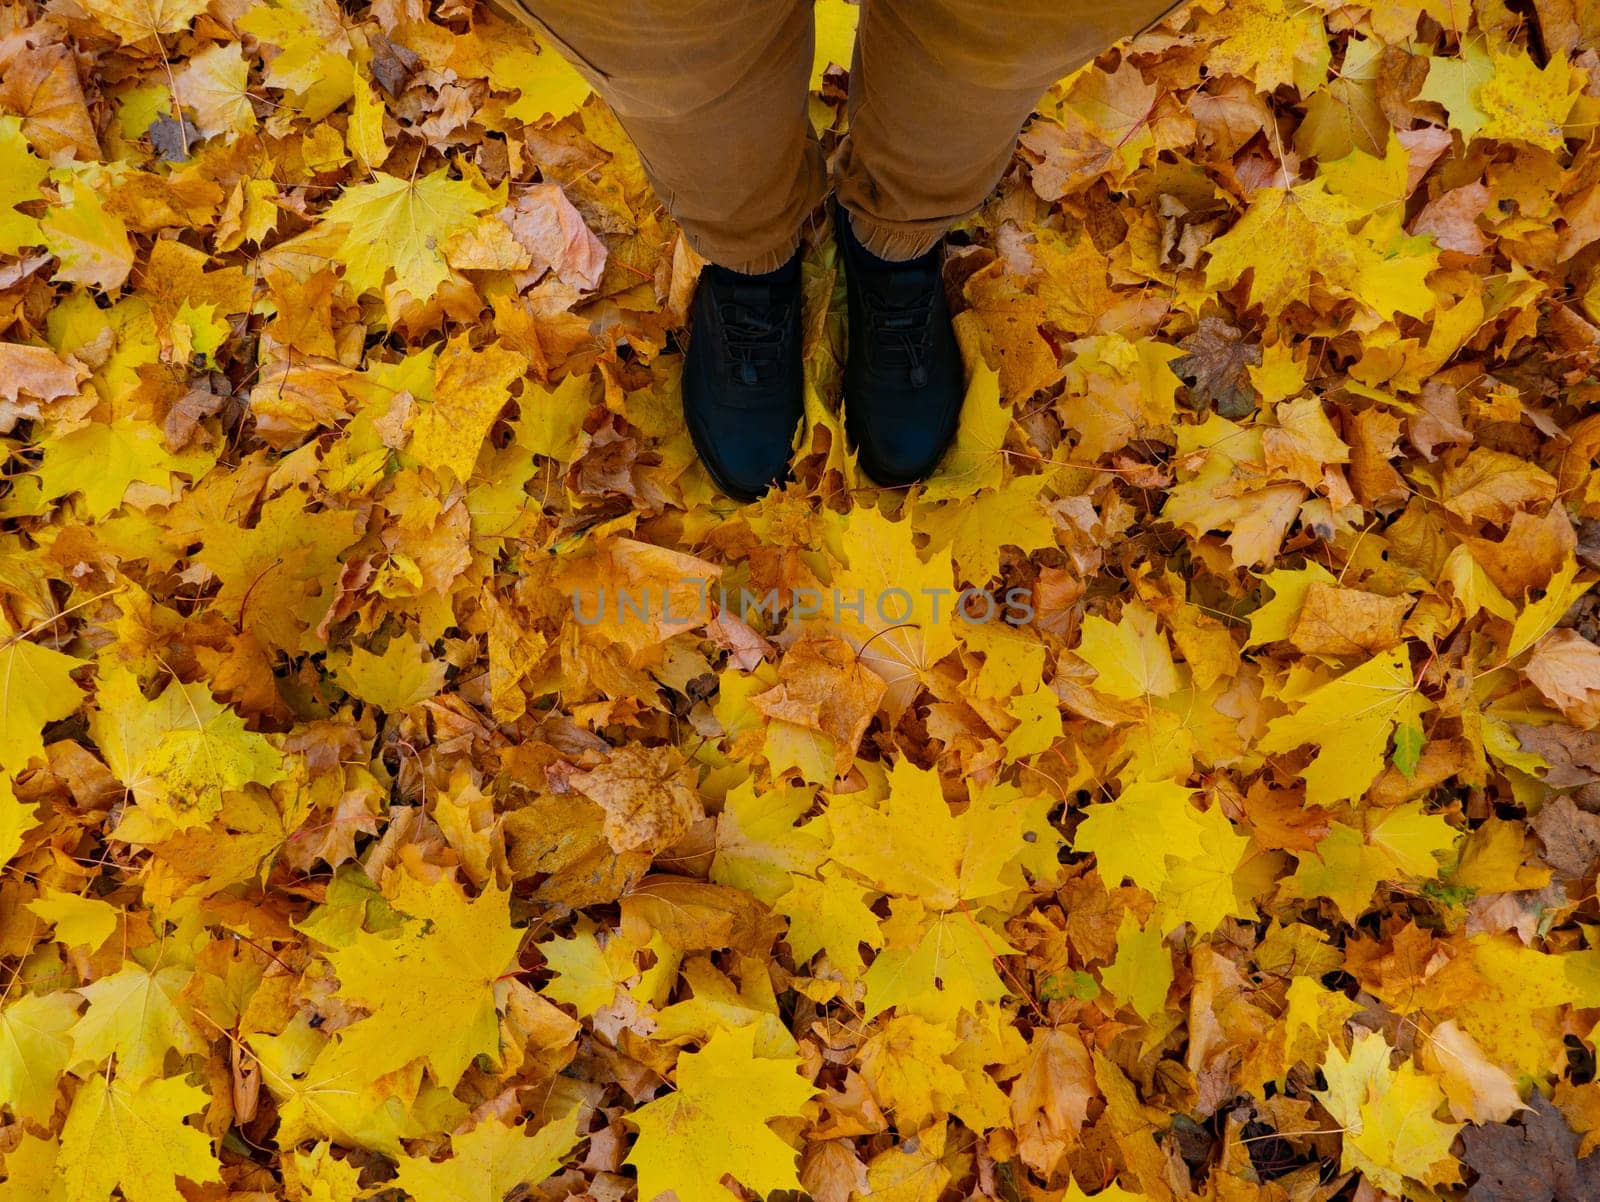 Top view of a man's shoes on a layer of yellow autumn leaves fallen from the trees, autumn photo of the change of season.